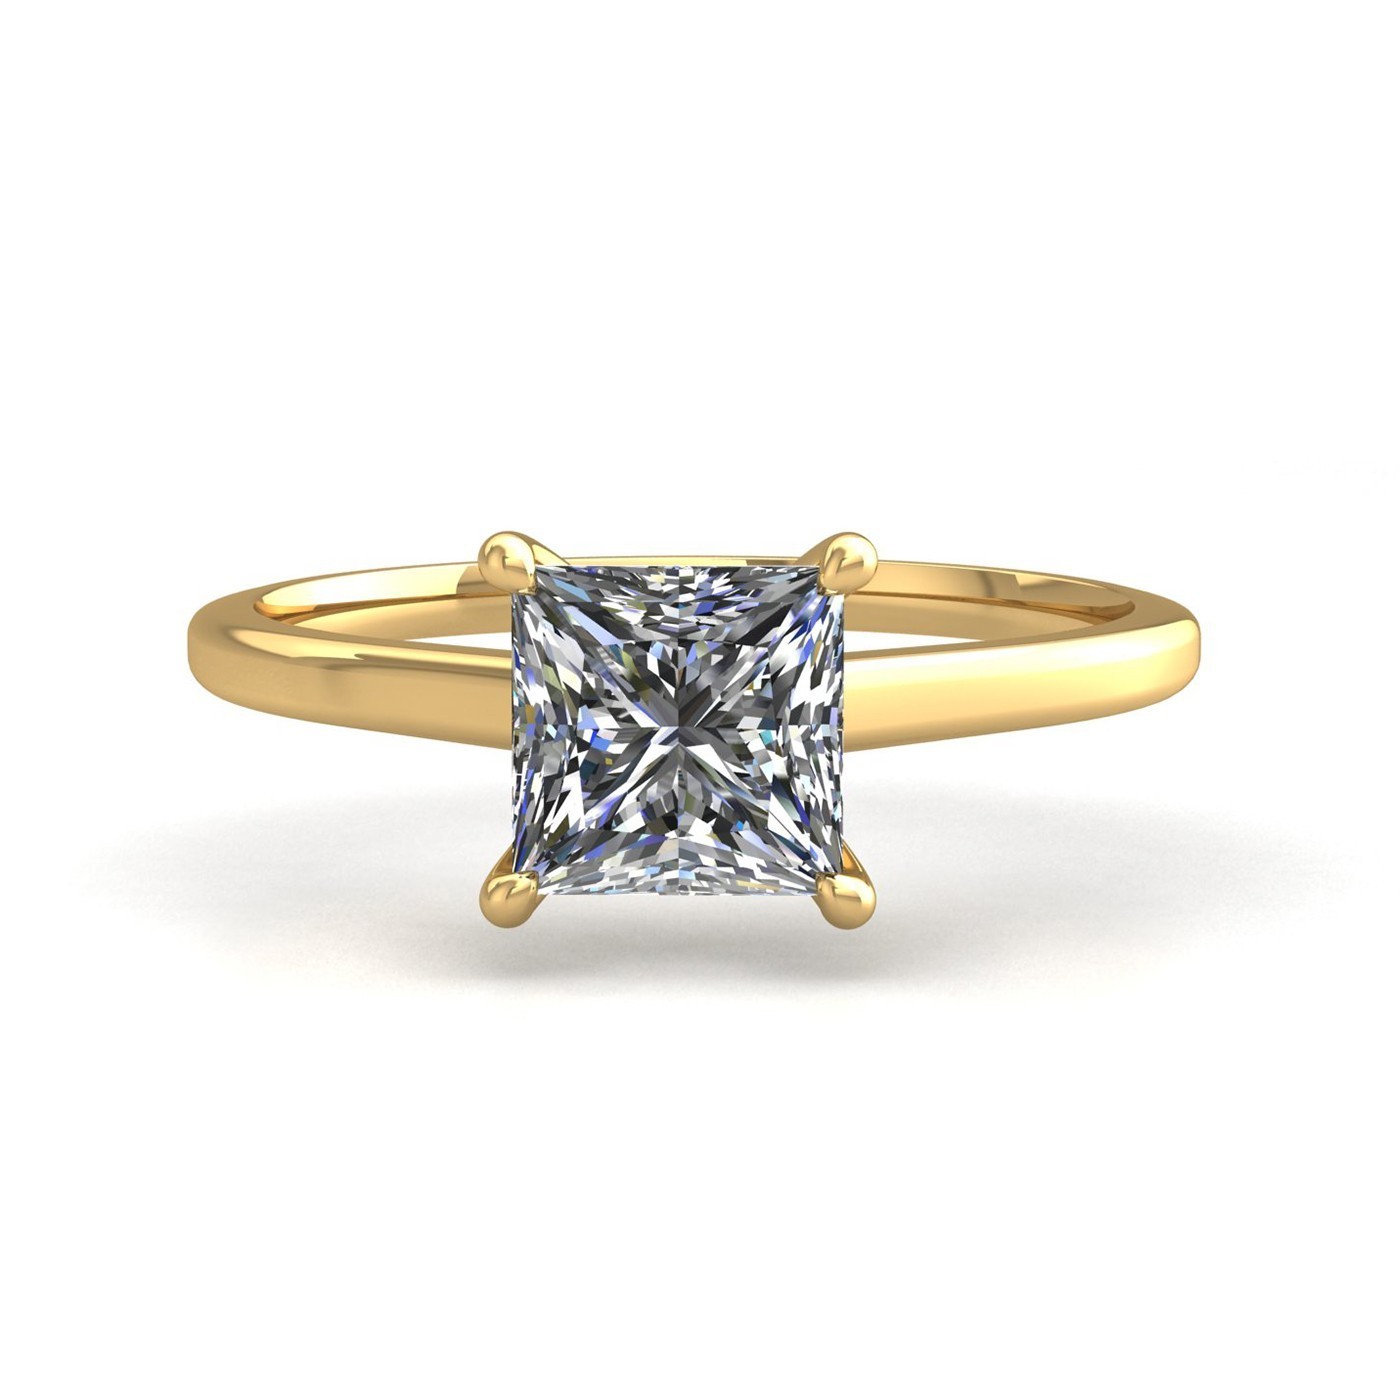 18k yellow gold  1,00 ct 4 prongs solitaire princess cut diamond engagement ring with whisper thin band